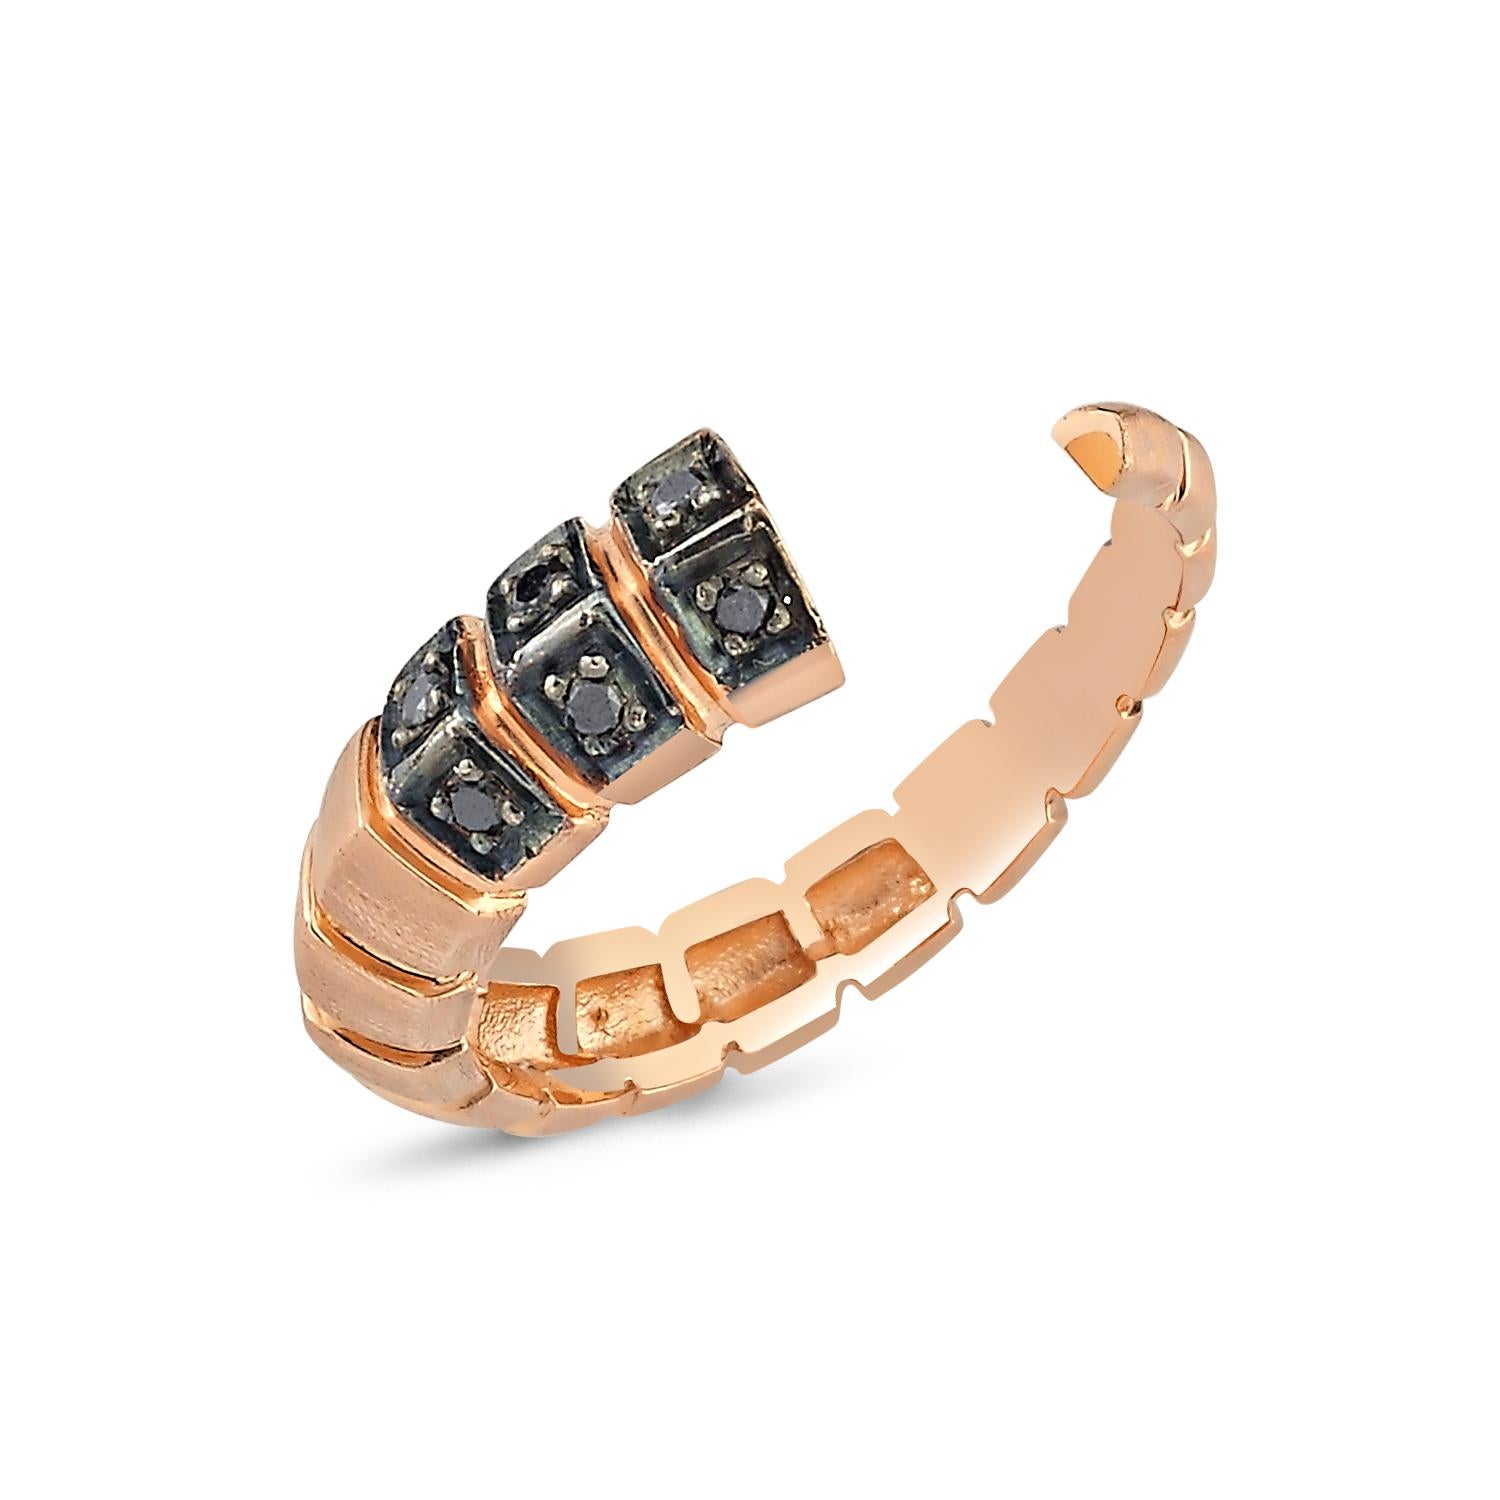 Dragon Tail Open Ring İn Rose Gold With Black Diamond By Selda Jewellery

Additional Information:-
Collection: Dragon Lady Collection
14k Rose Gold
0.06Ct Black Diamond